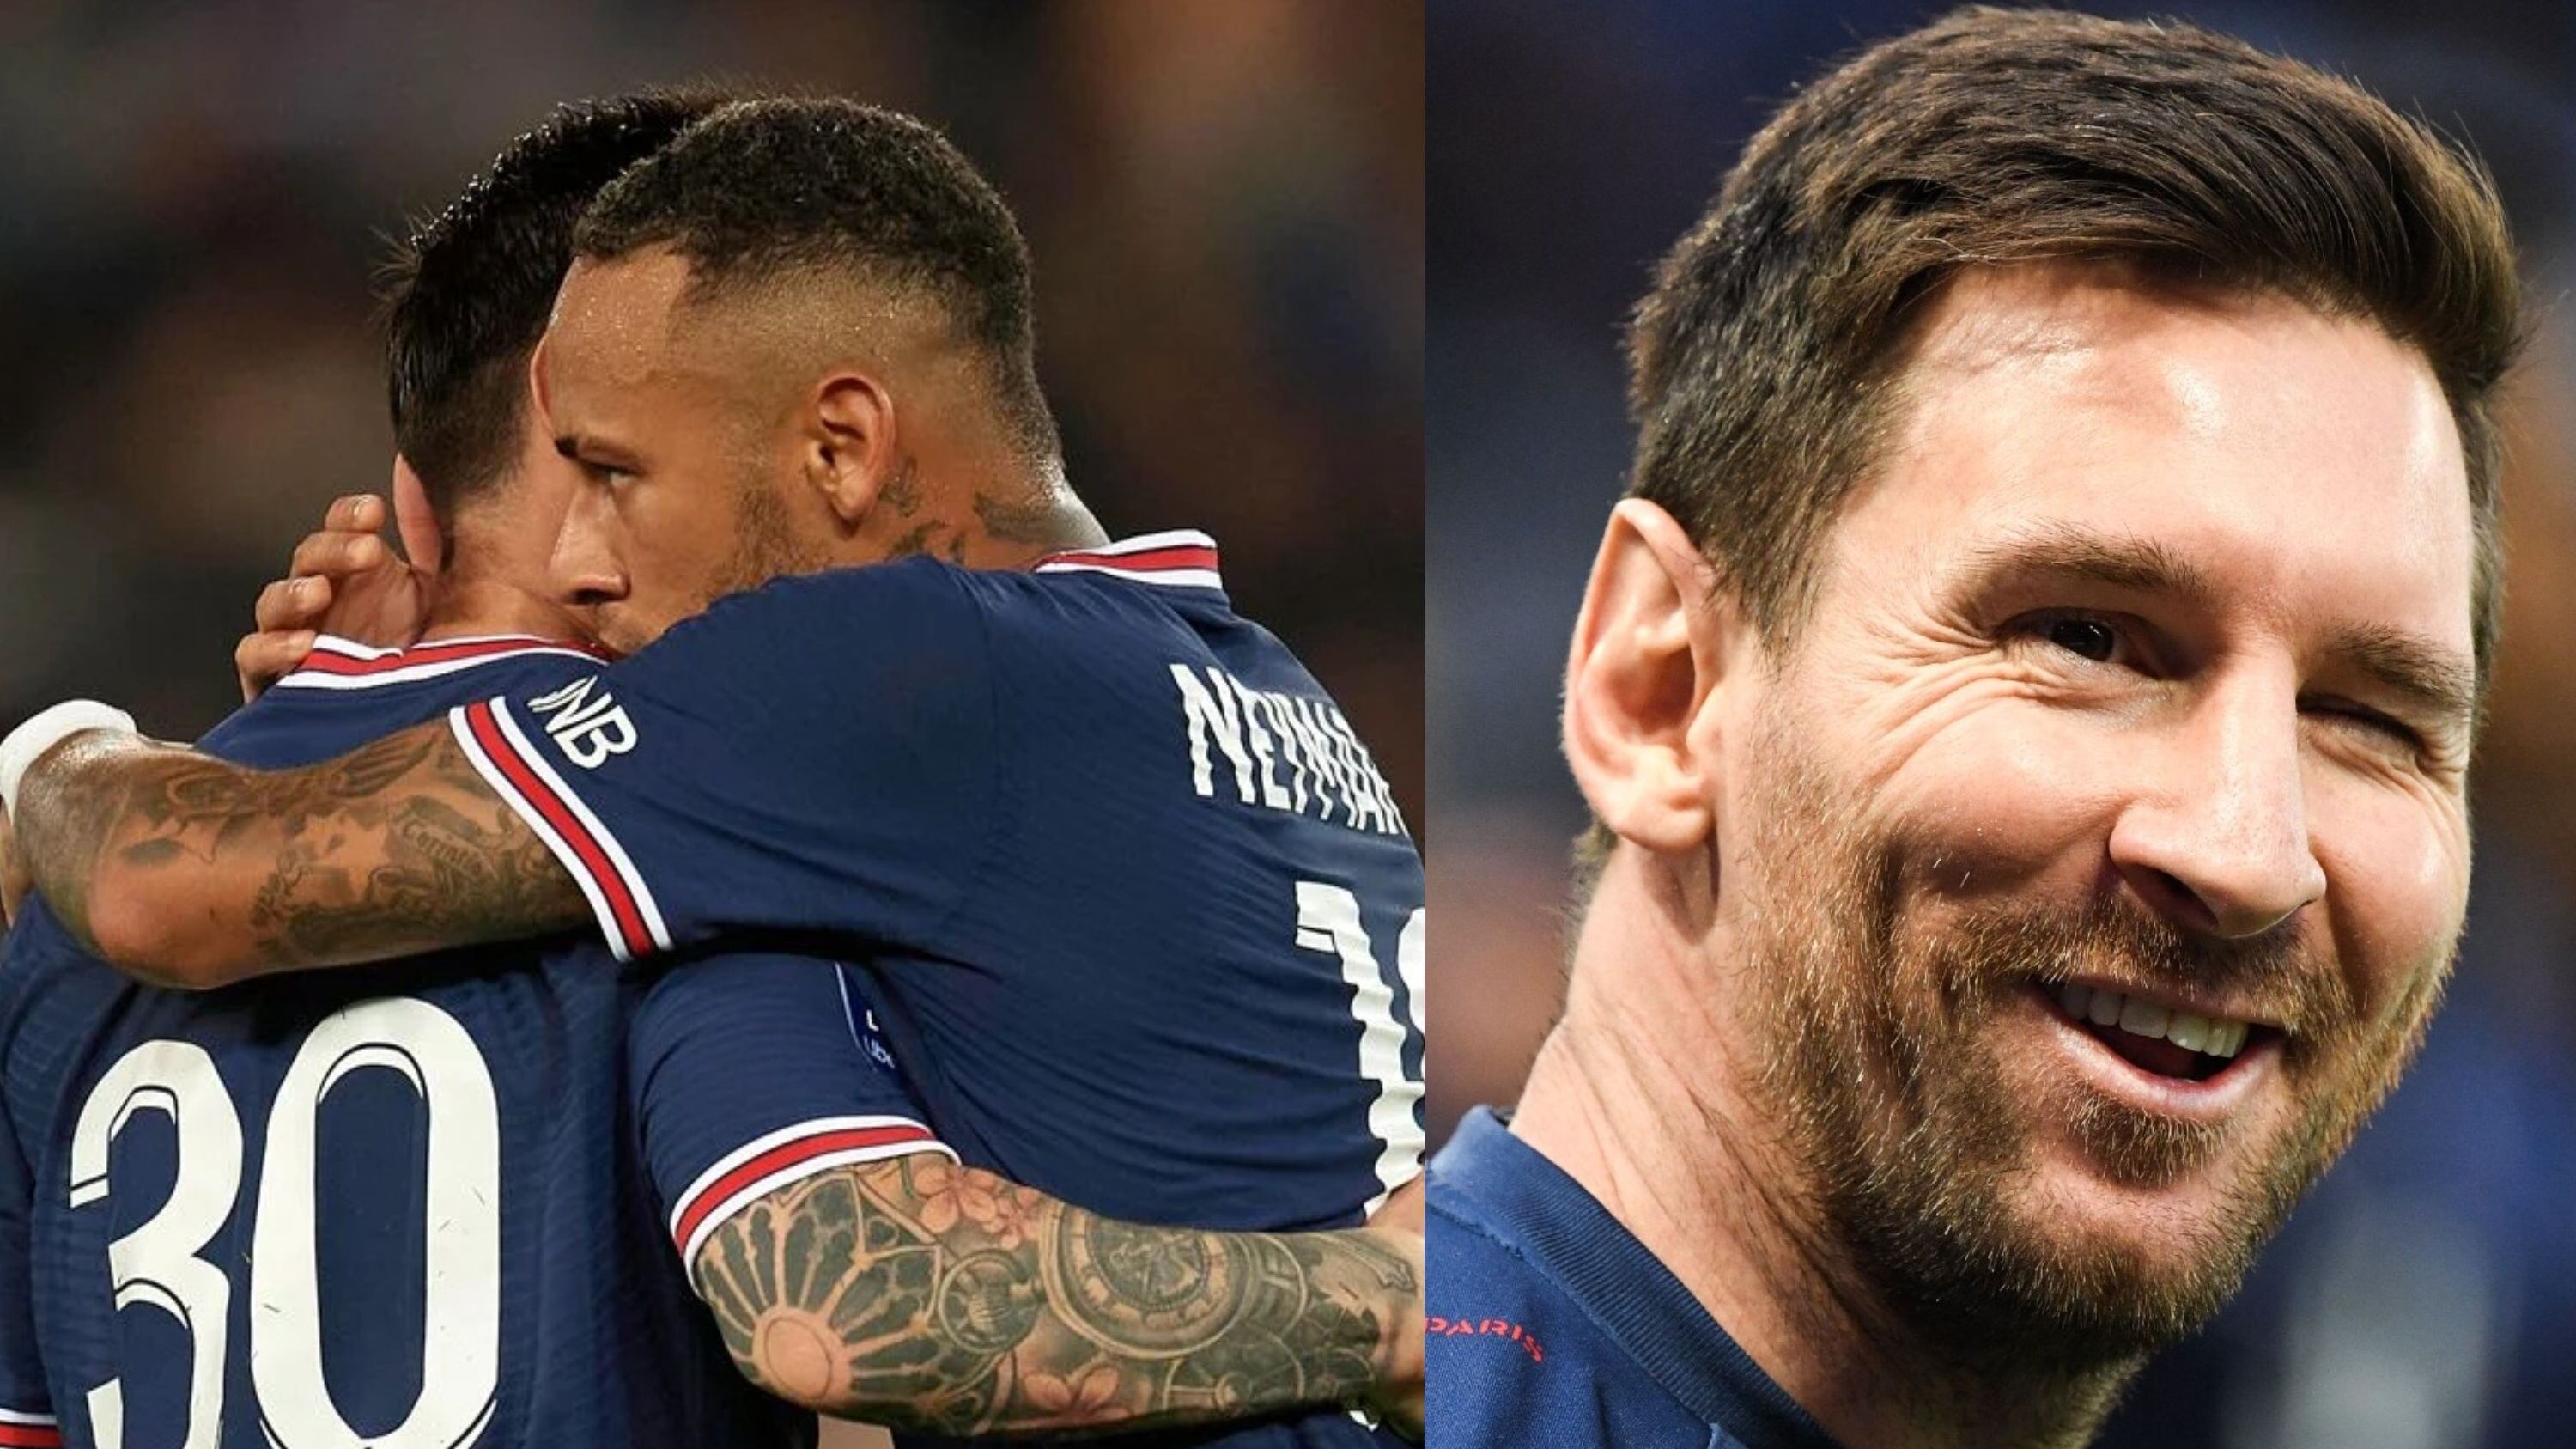 Messi's new best friend at PSG after Paredes' departure is not Neymar